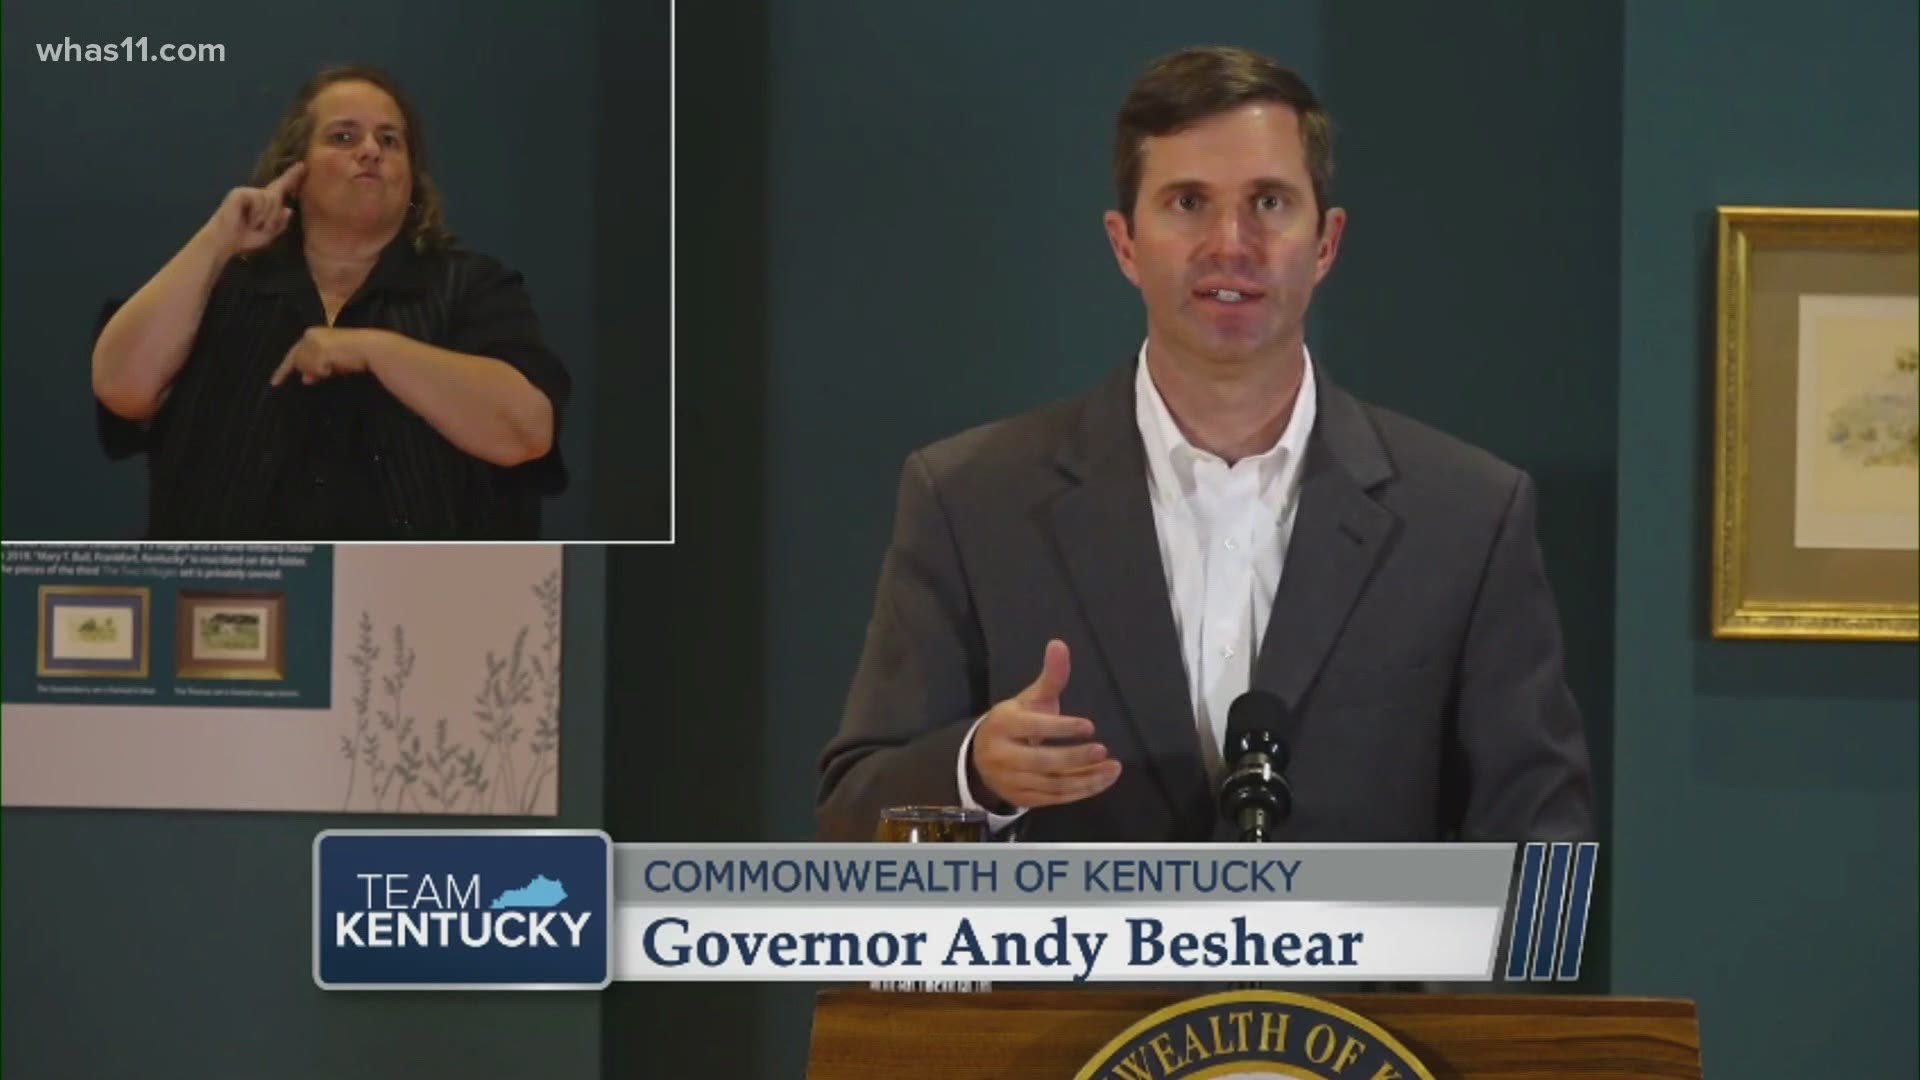 Governor Andy Beshear announced his plans today to bring back the state's health insurance exchange.